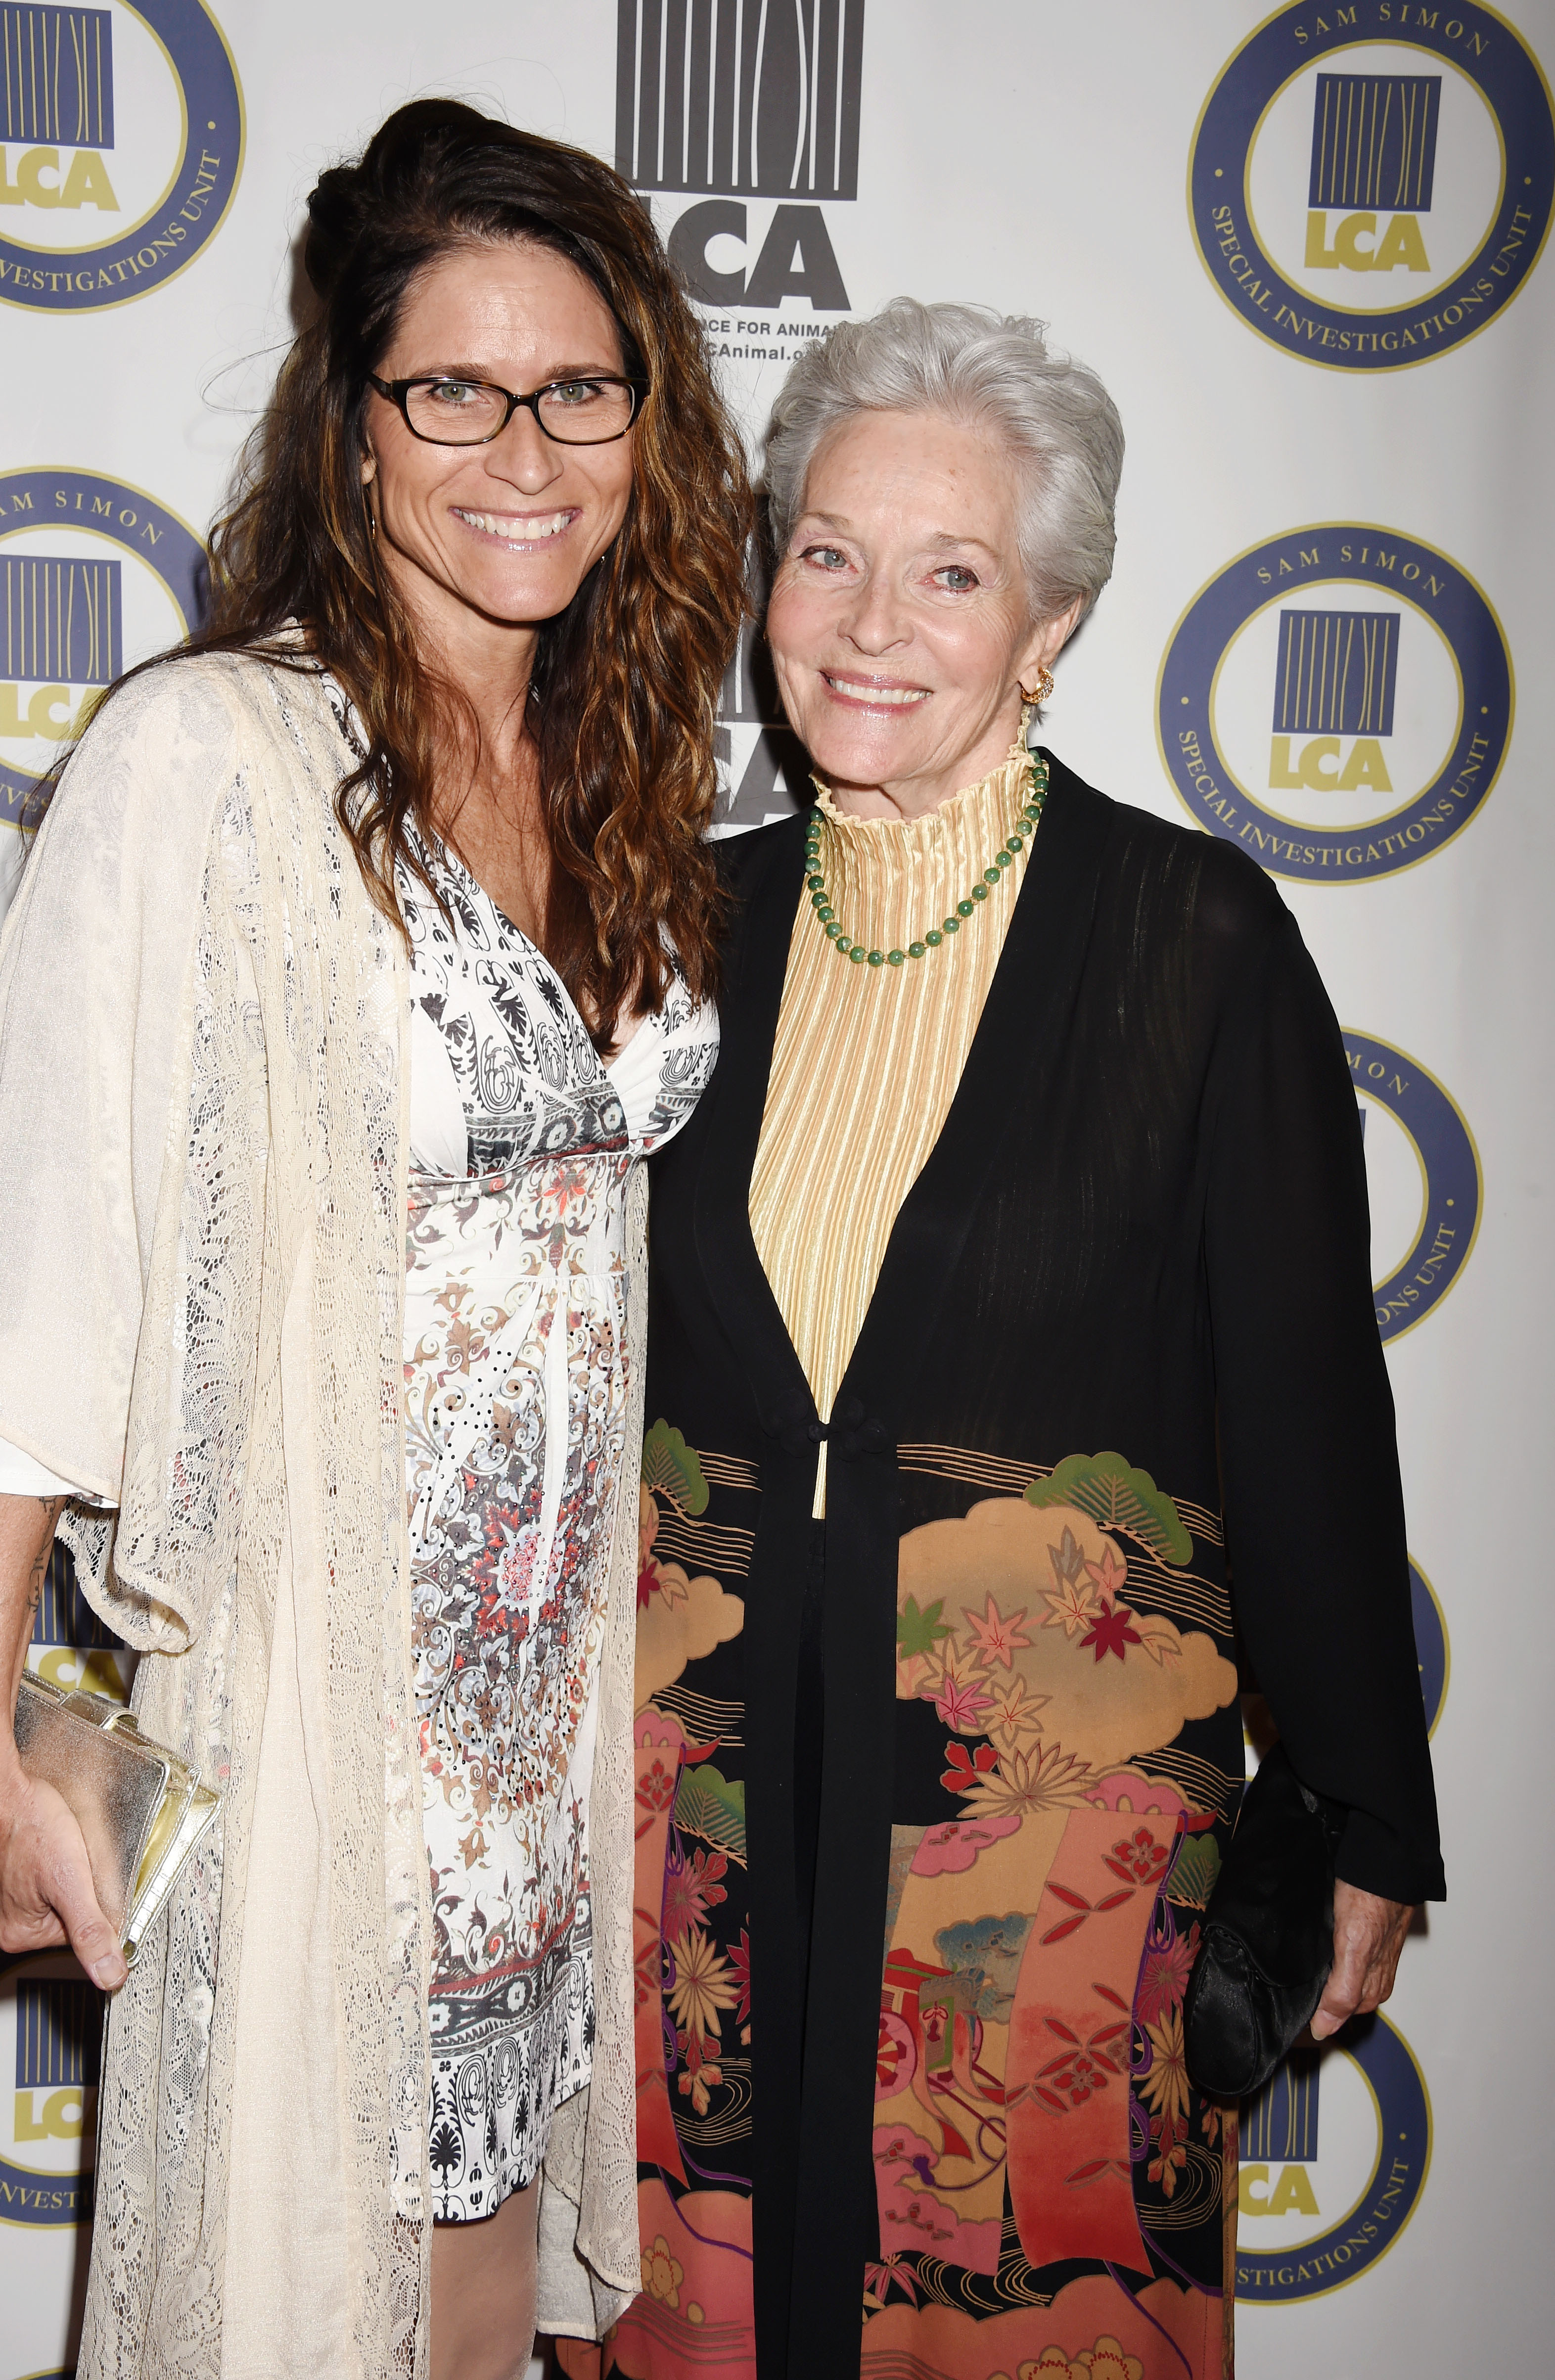 Actress Lee Meriwether and daughter Lesley Aletter attend the Last Chance for Animals Benefit Gala at The Beverly Hilton Hotel on October 24, 2015, in Beverly Hills, California. | Source: Getty Images